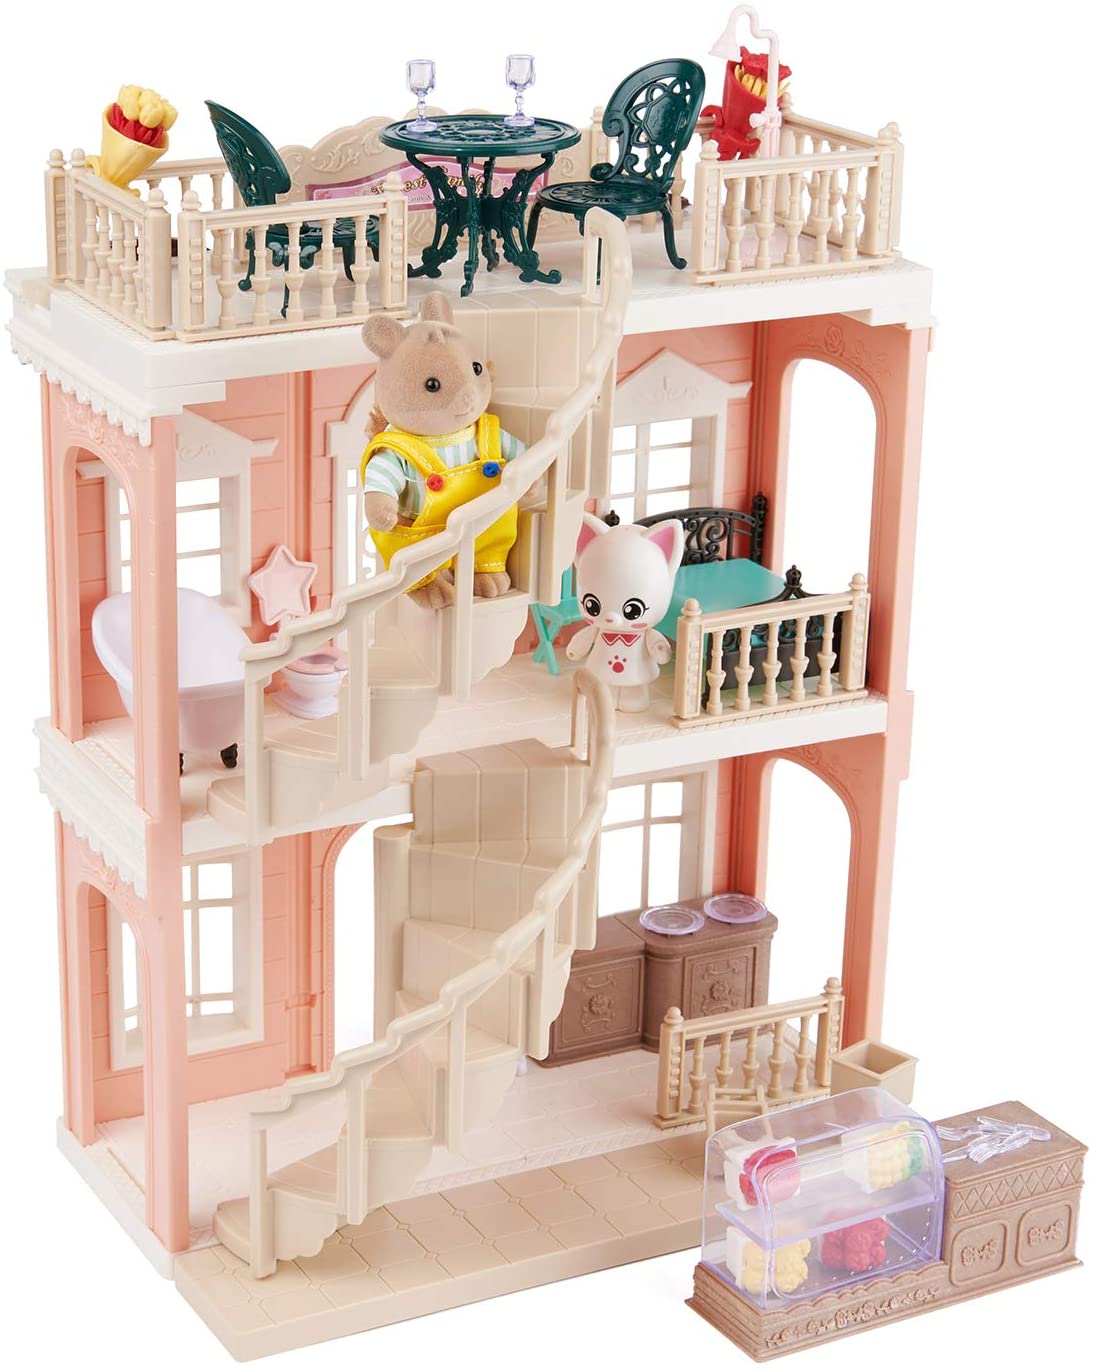 FULIM Forest-Family Doll House With Furniture & Figures